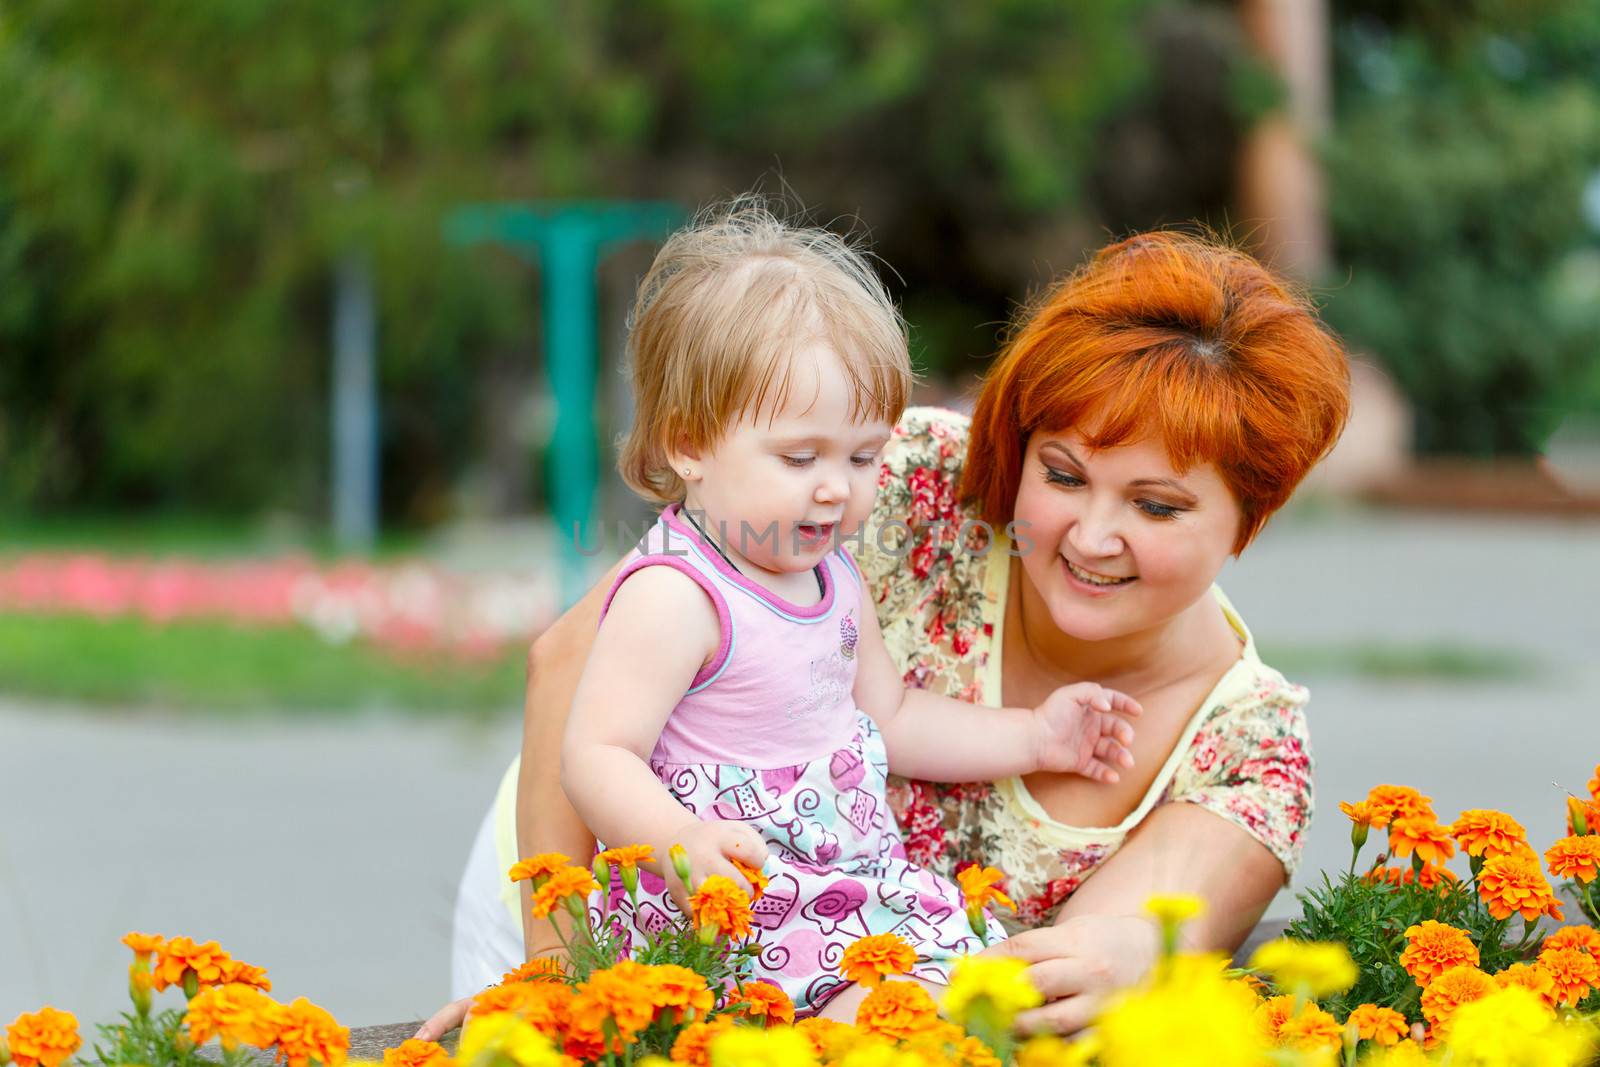 Family, mother hugging her daughter in the park near a flower bed